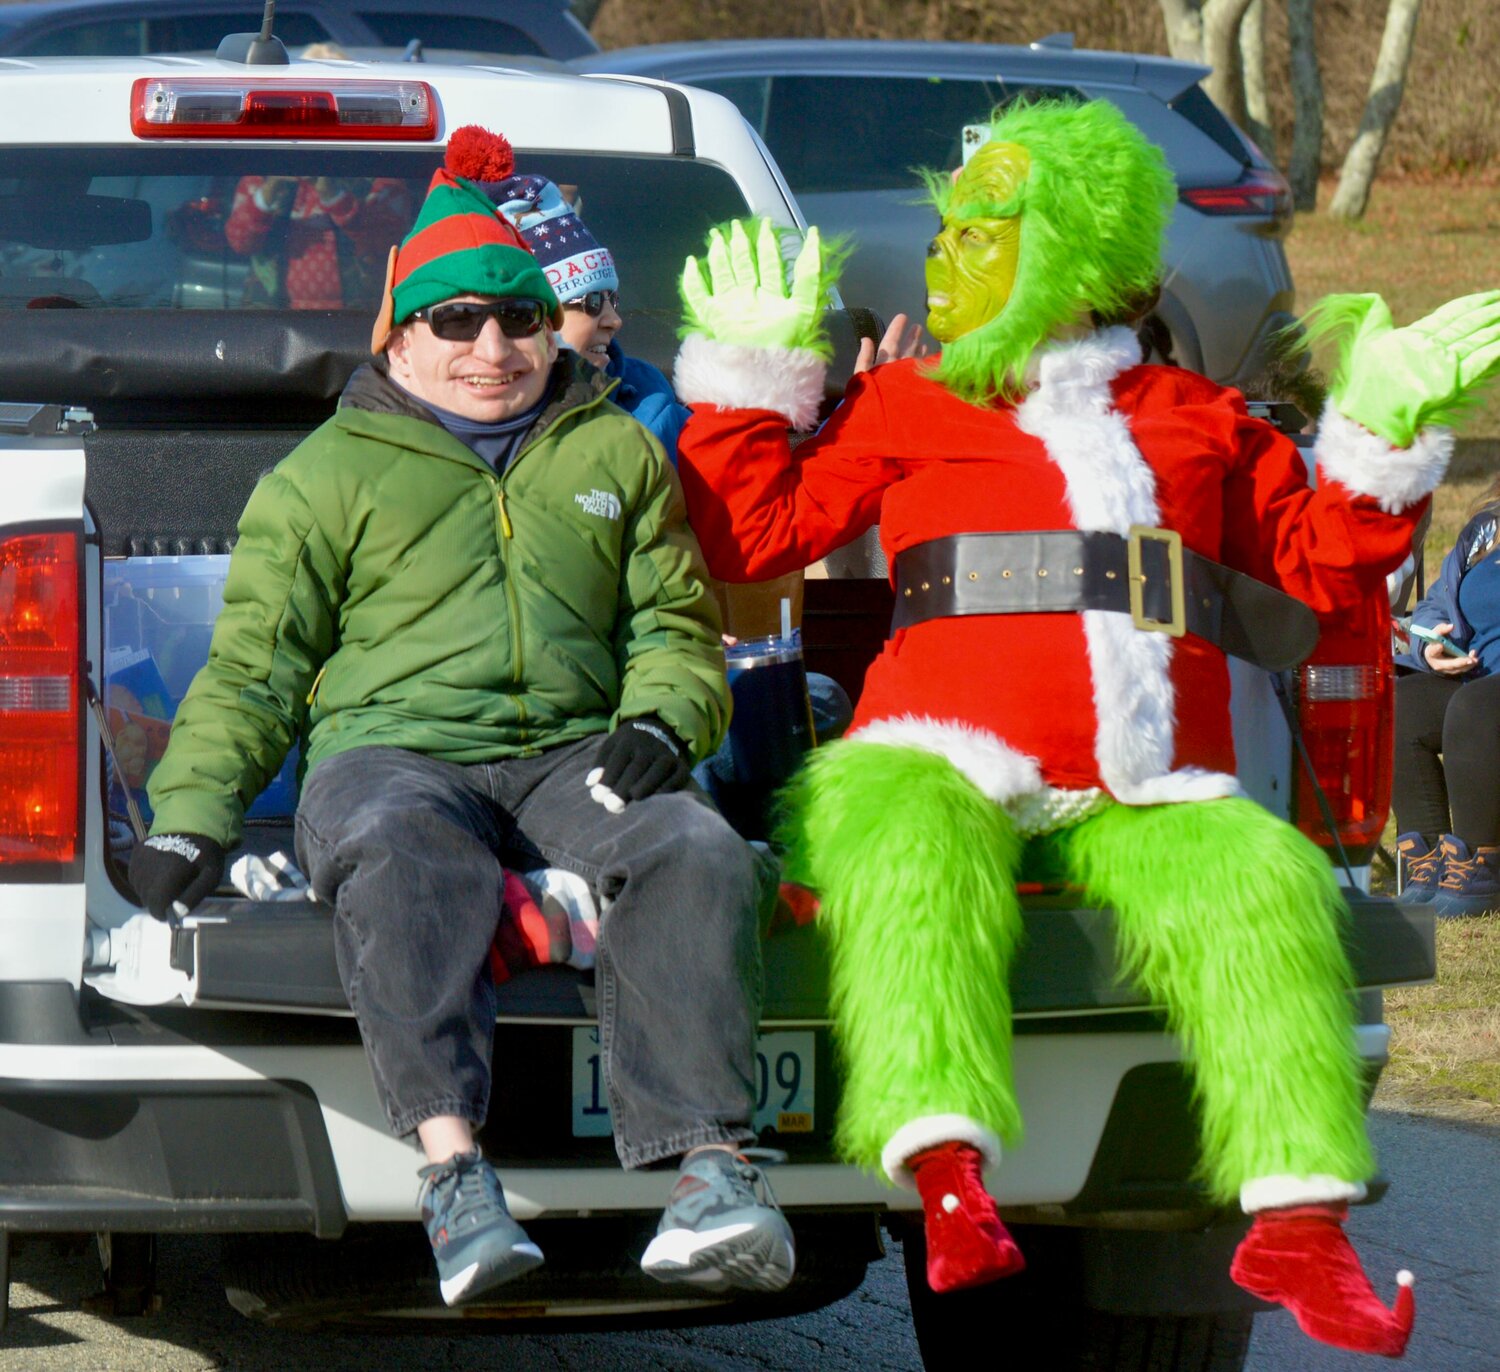 Jared Tierno, Ruth Faria (obscured), and Olivia Garcia as the Grinch (from left) greet passersby during the mini-parade.